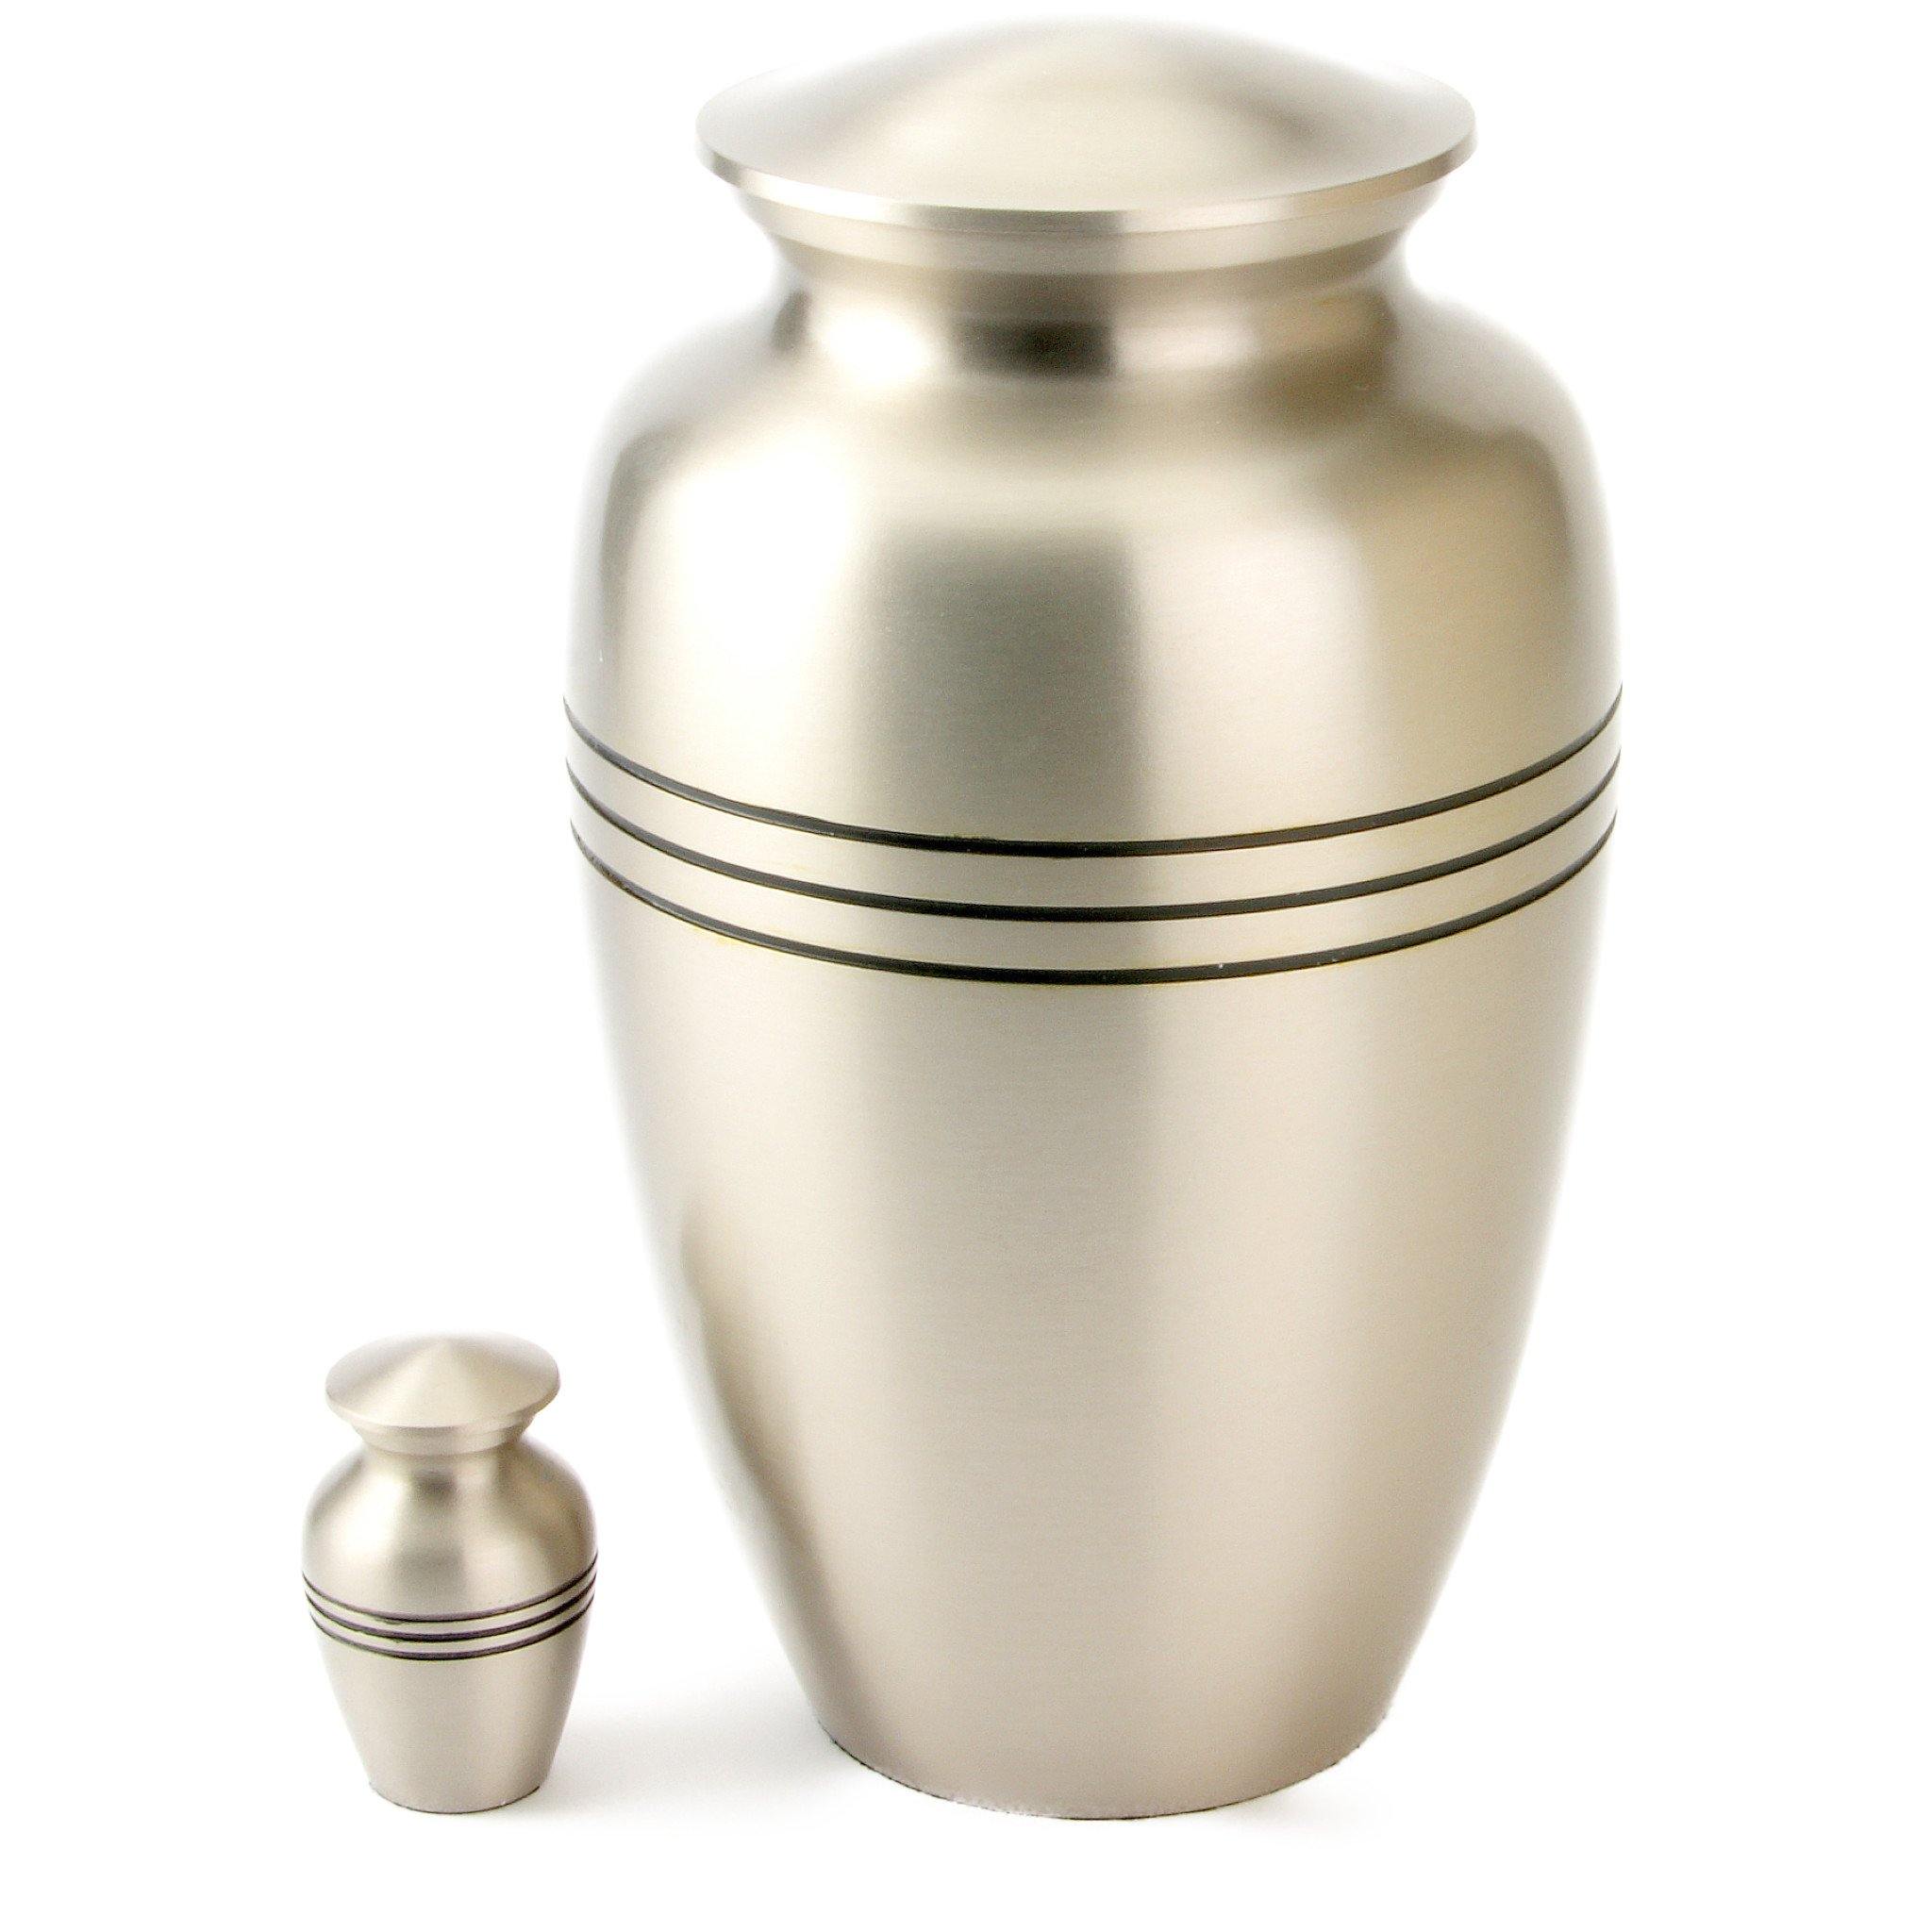 Cheadle Cremation Ashes Urn Adult RC